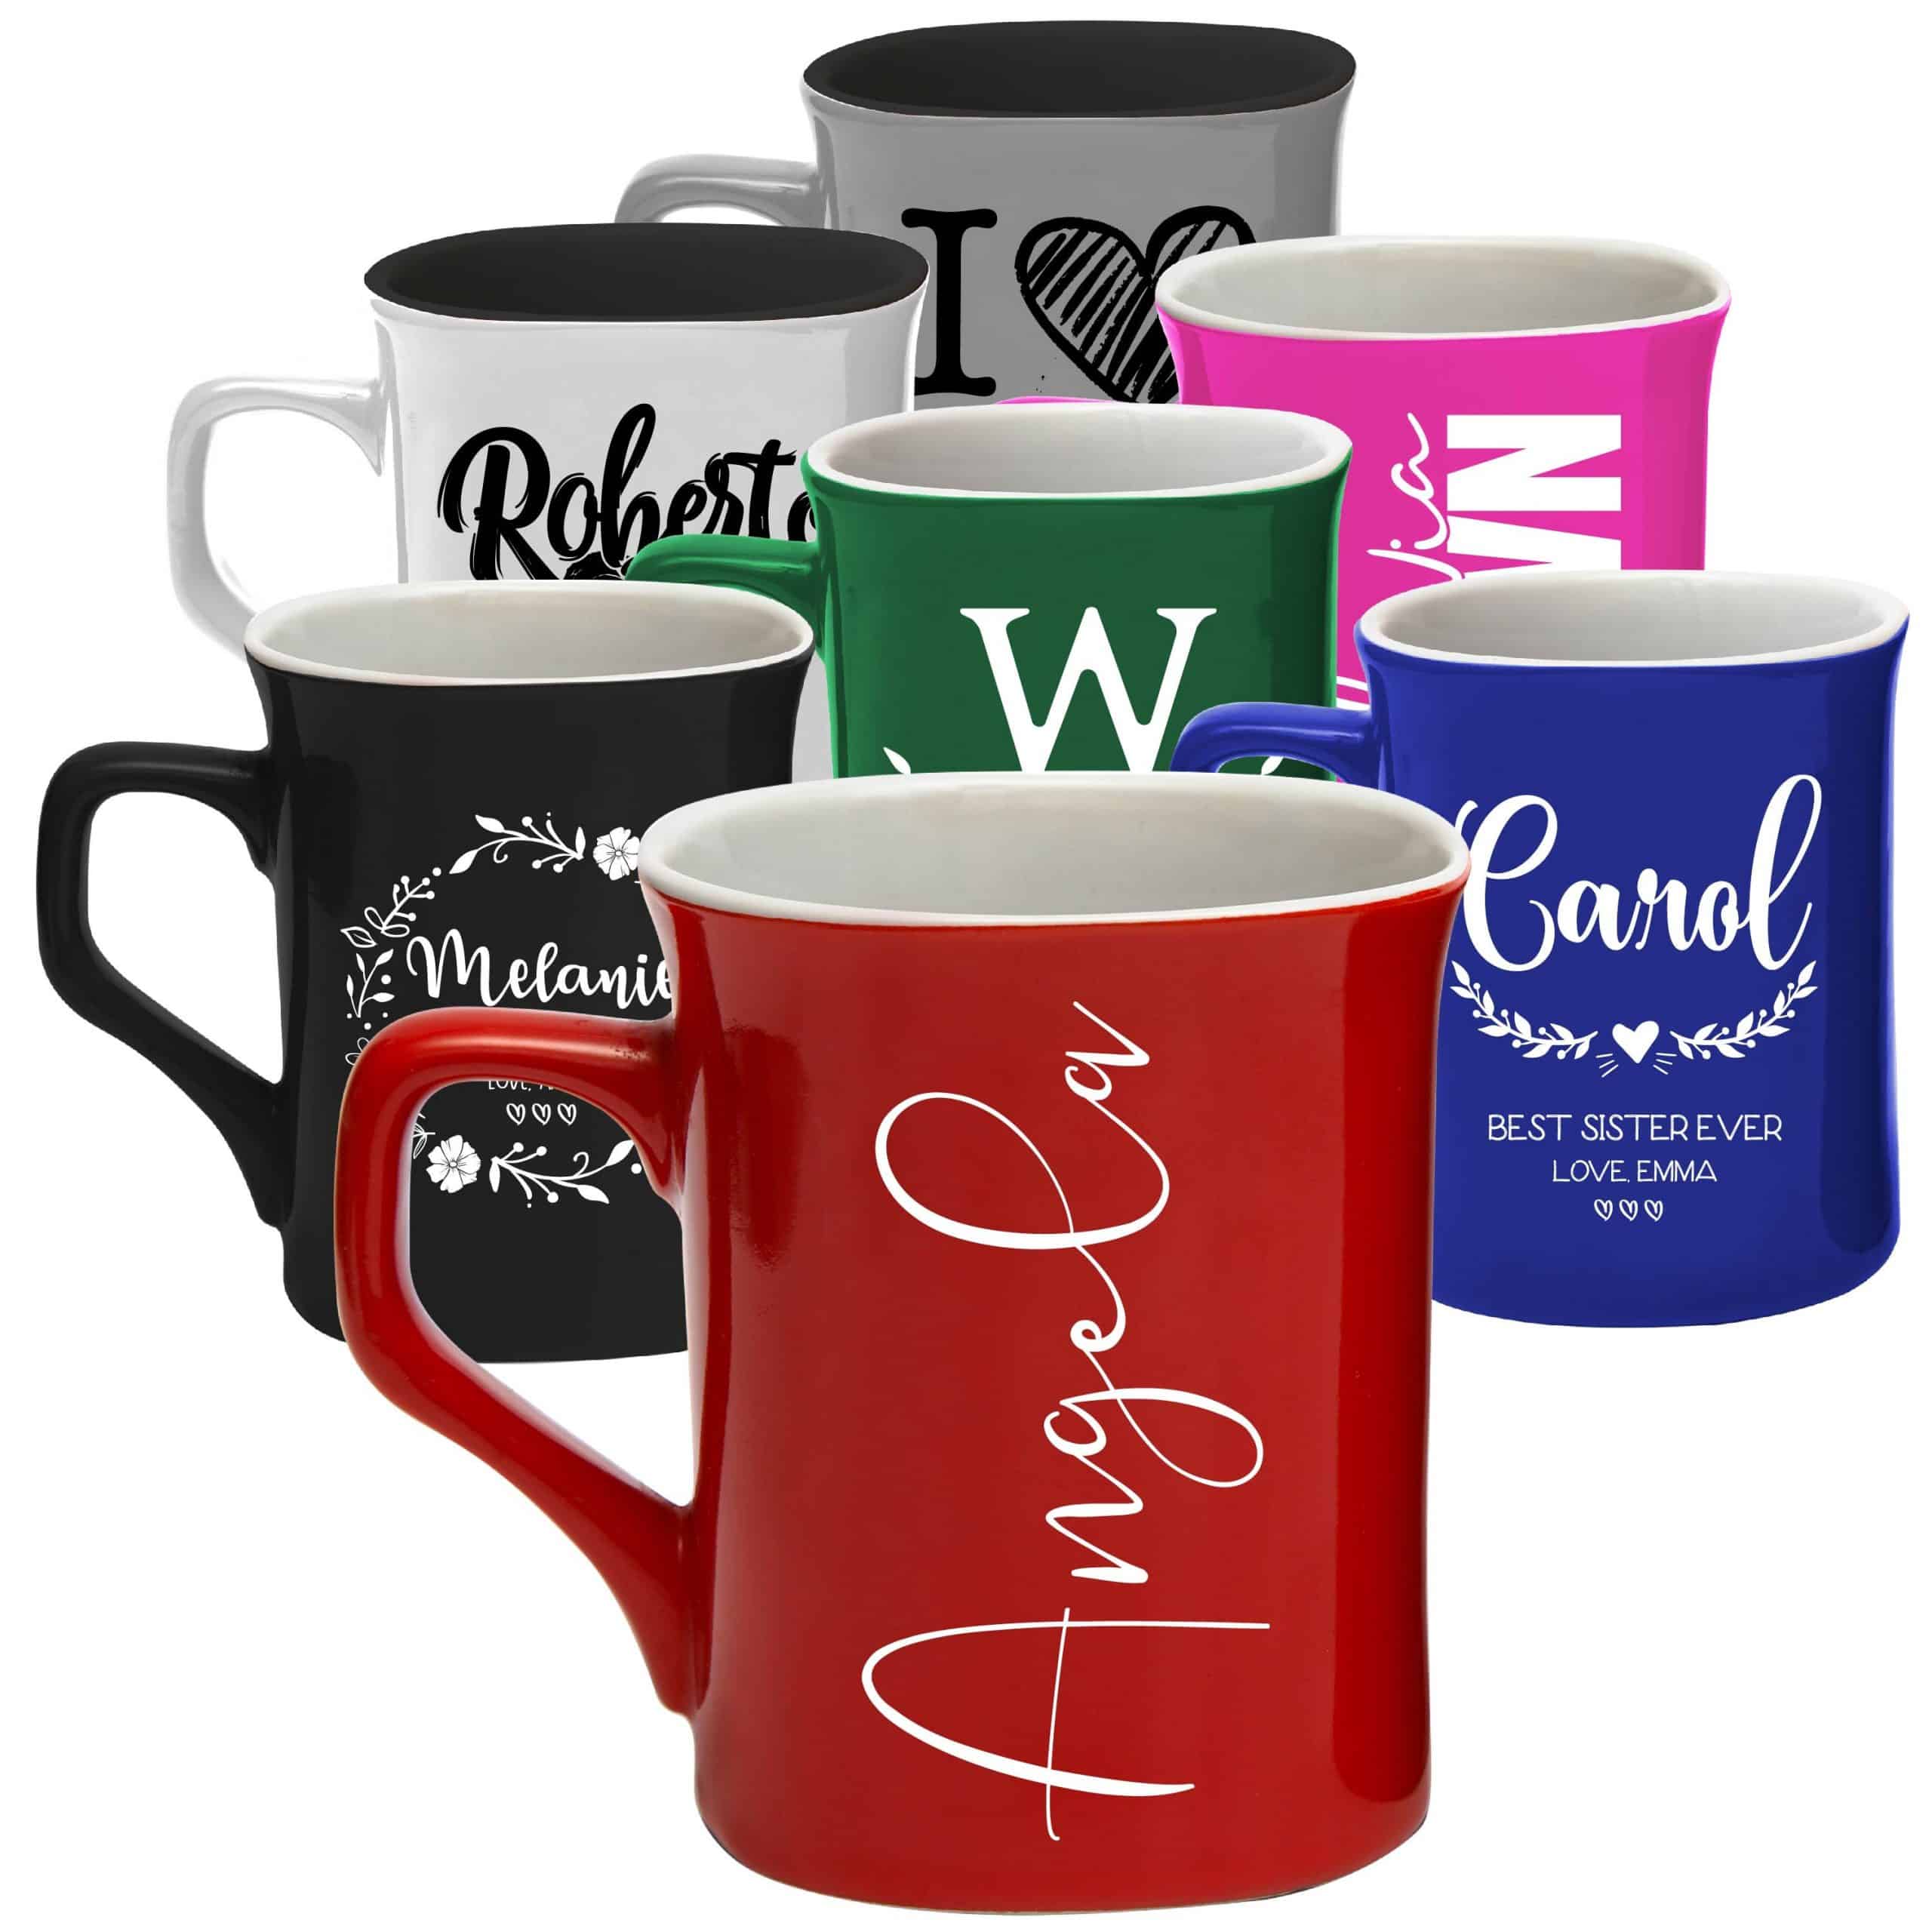 Personalized Photo Coffee Mugs With Name